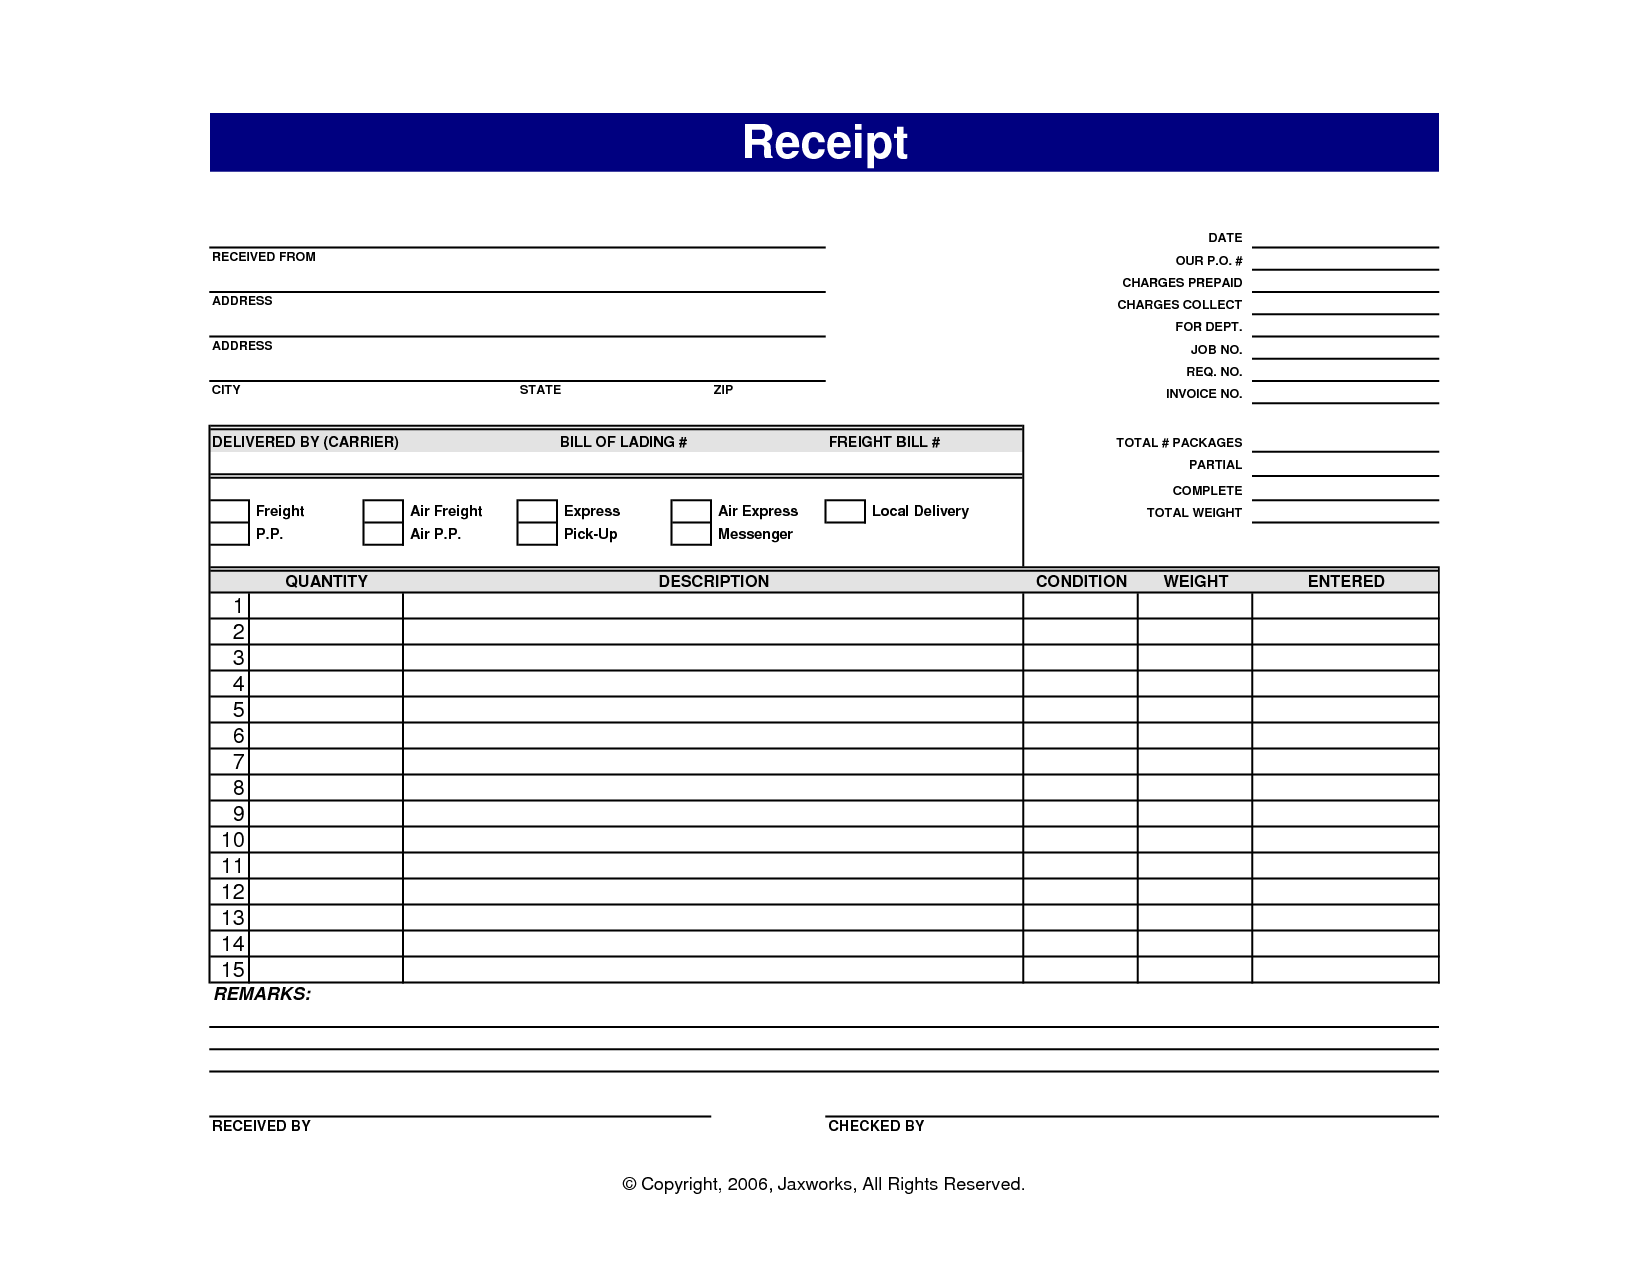 7-best-images-of-blank-printable-receipt-templates-free-printable